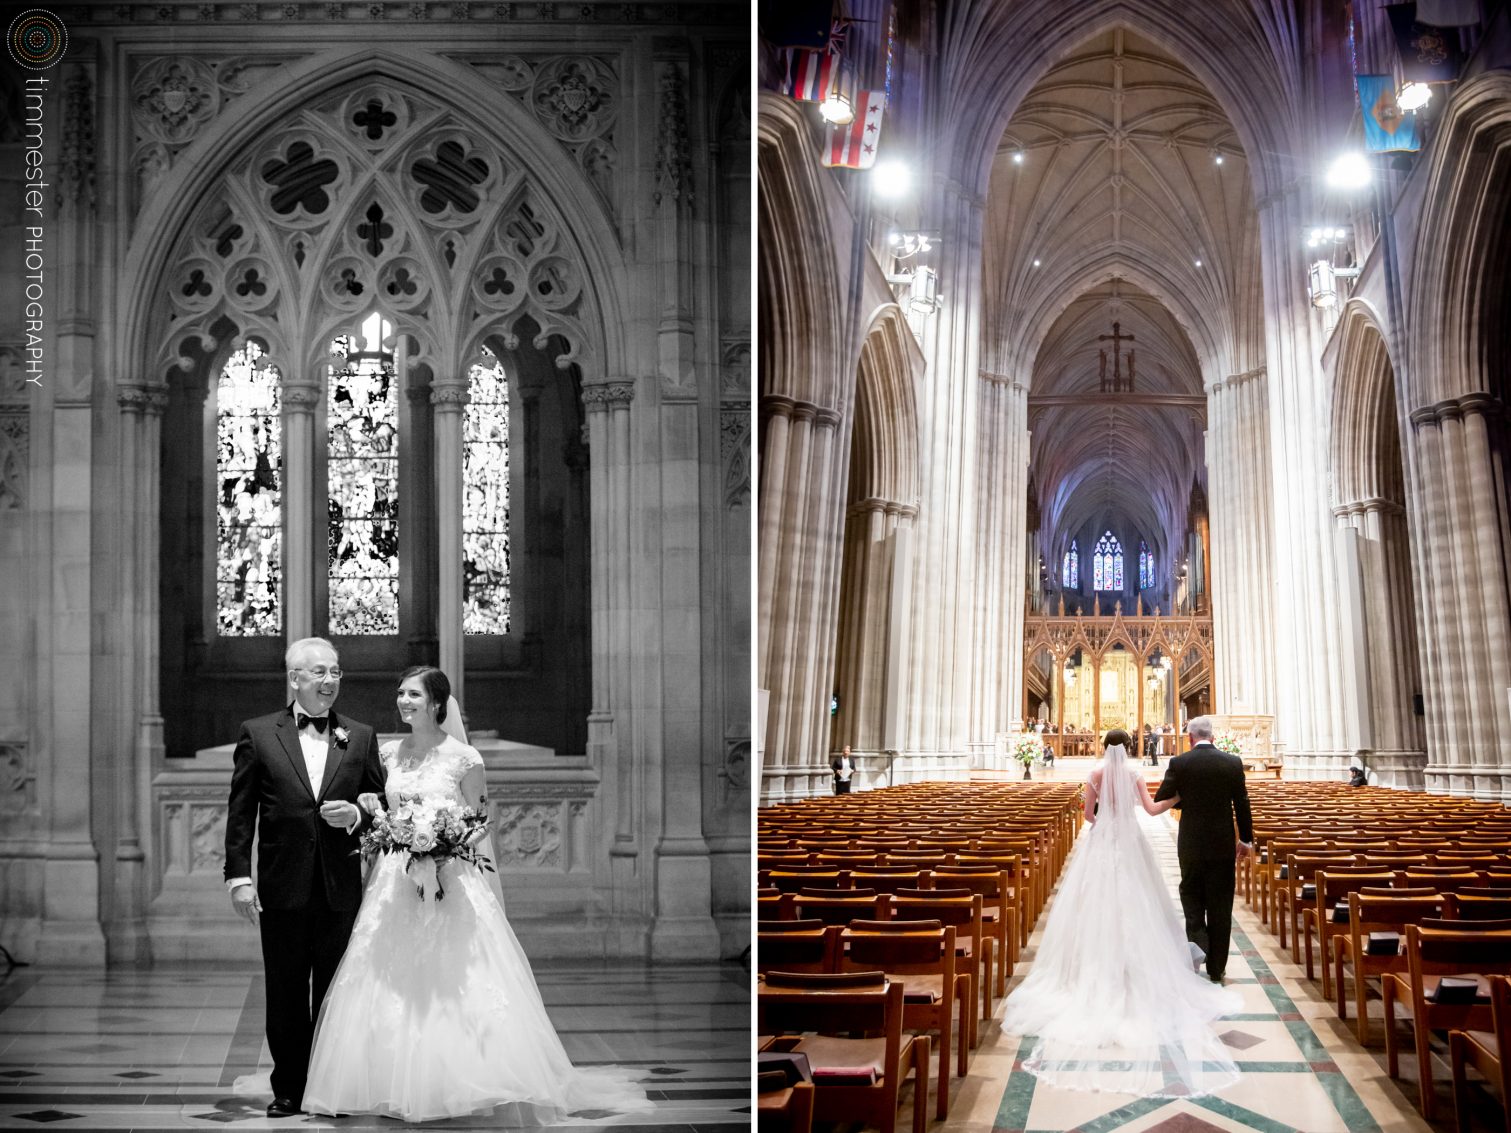 A beautiful wedding at The National Cathedral in Washington, DC.